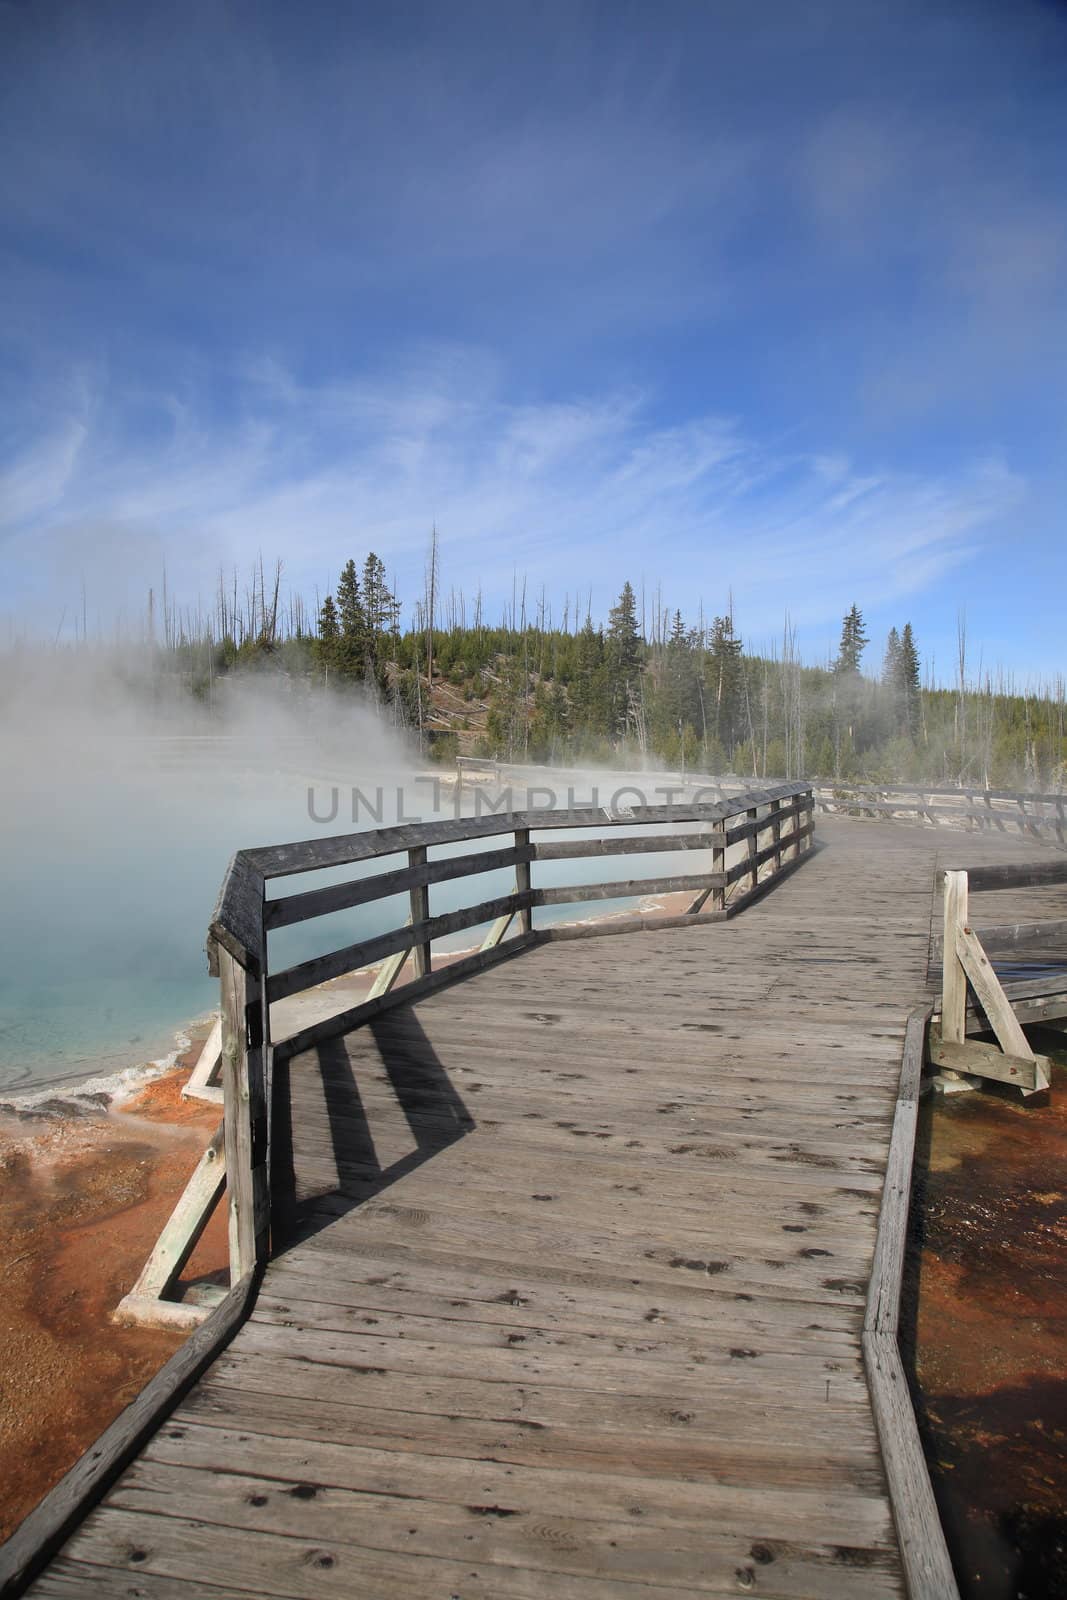 Yellowstone Park - West Thumb Geyser Basin by Ffooter